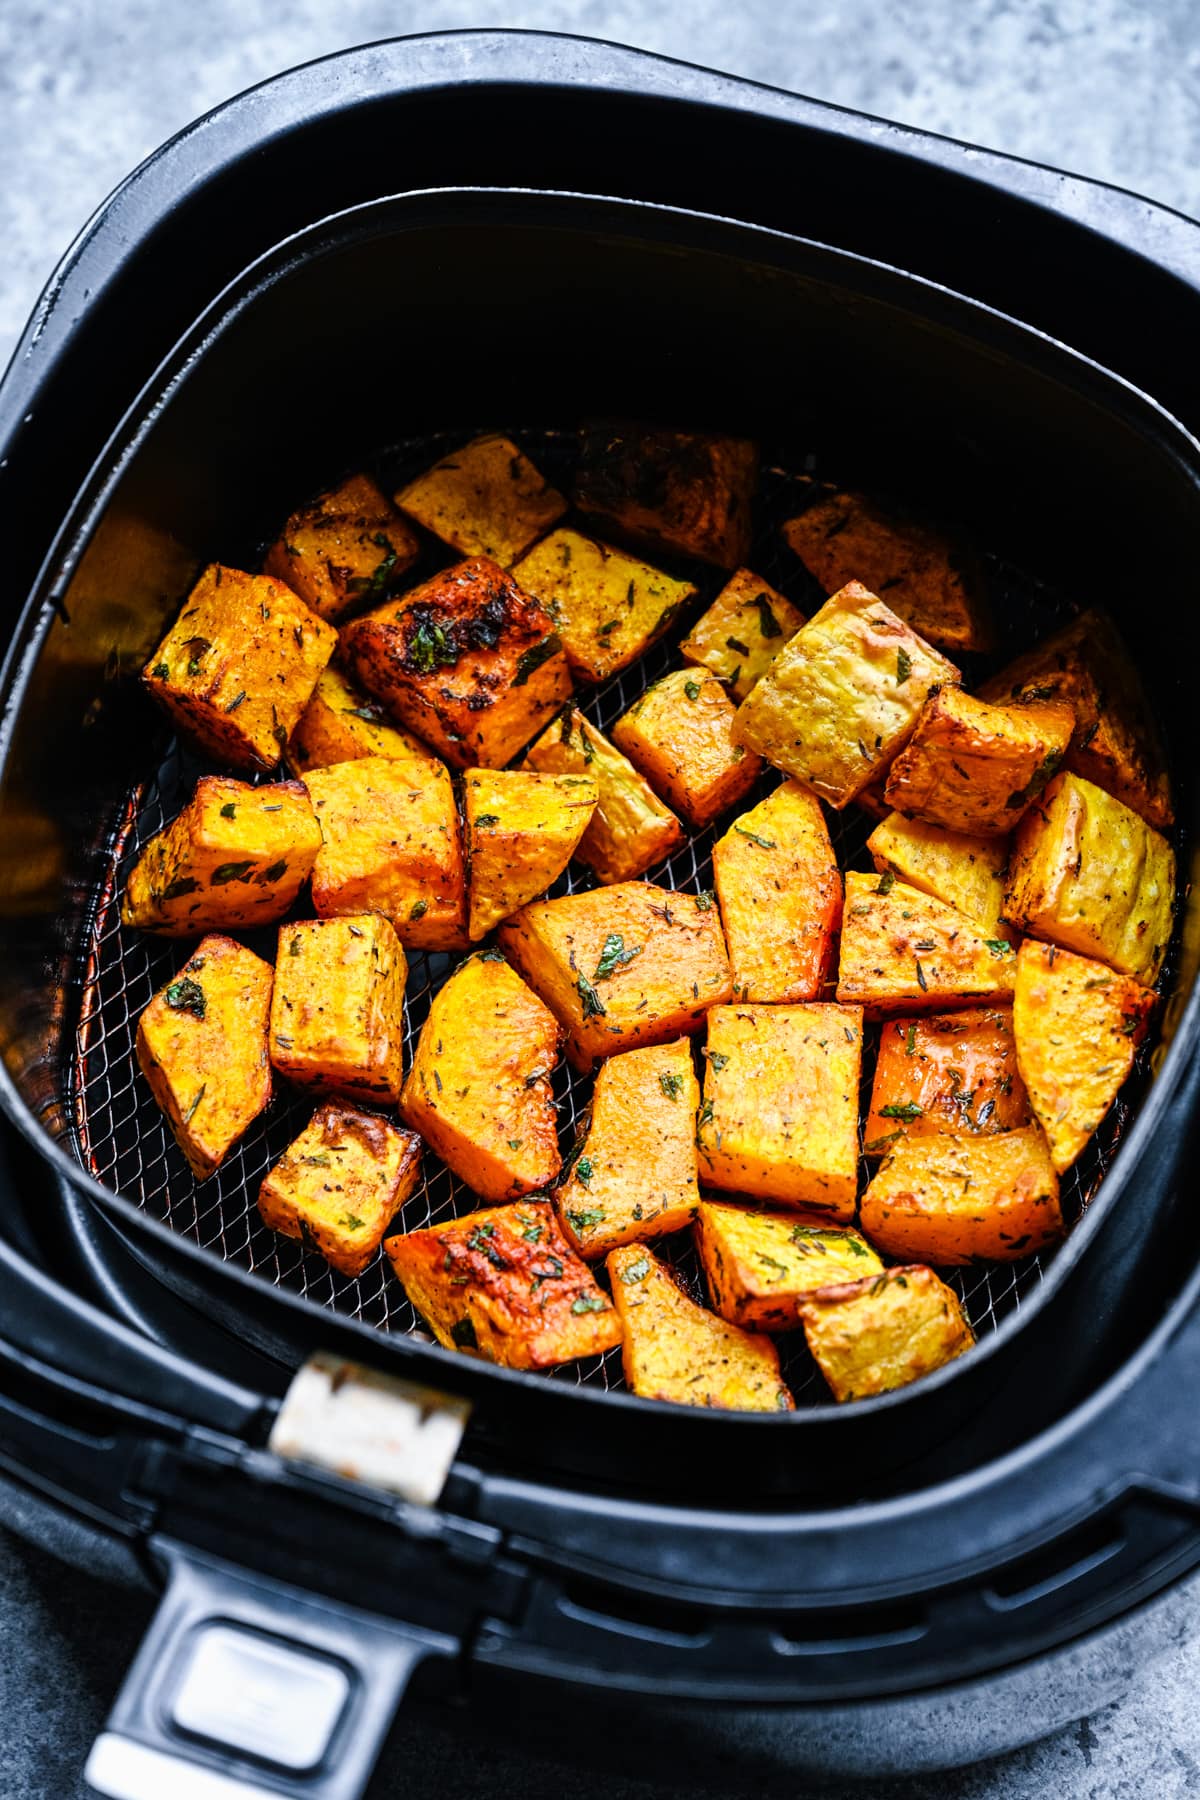 Finished butternut squash in the air fryer.